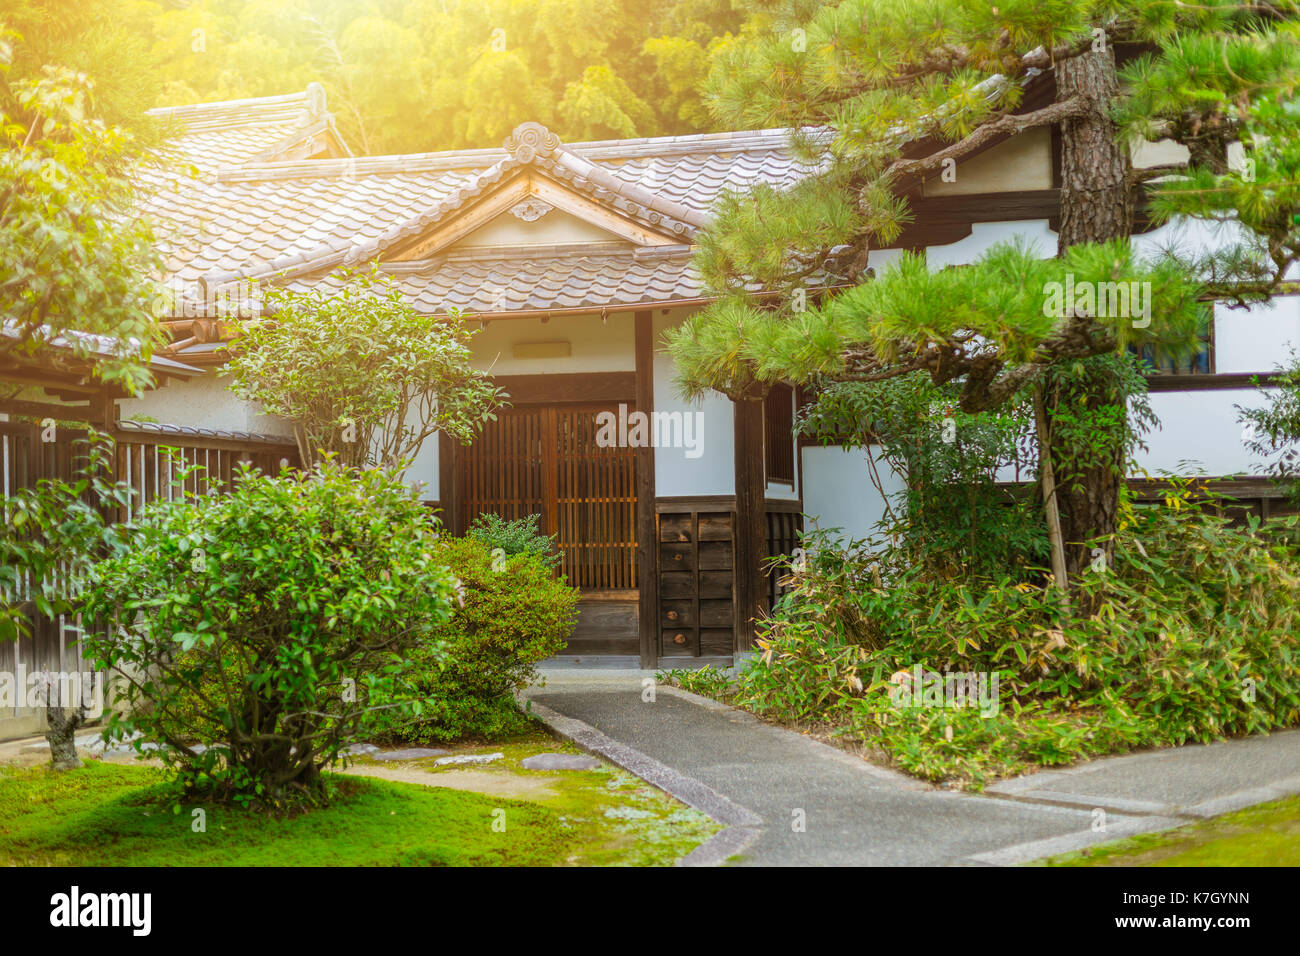 Japan Home garden zen style traditional Asian architecture. Stock Photo